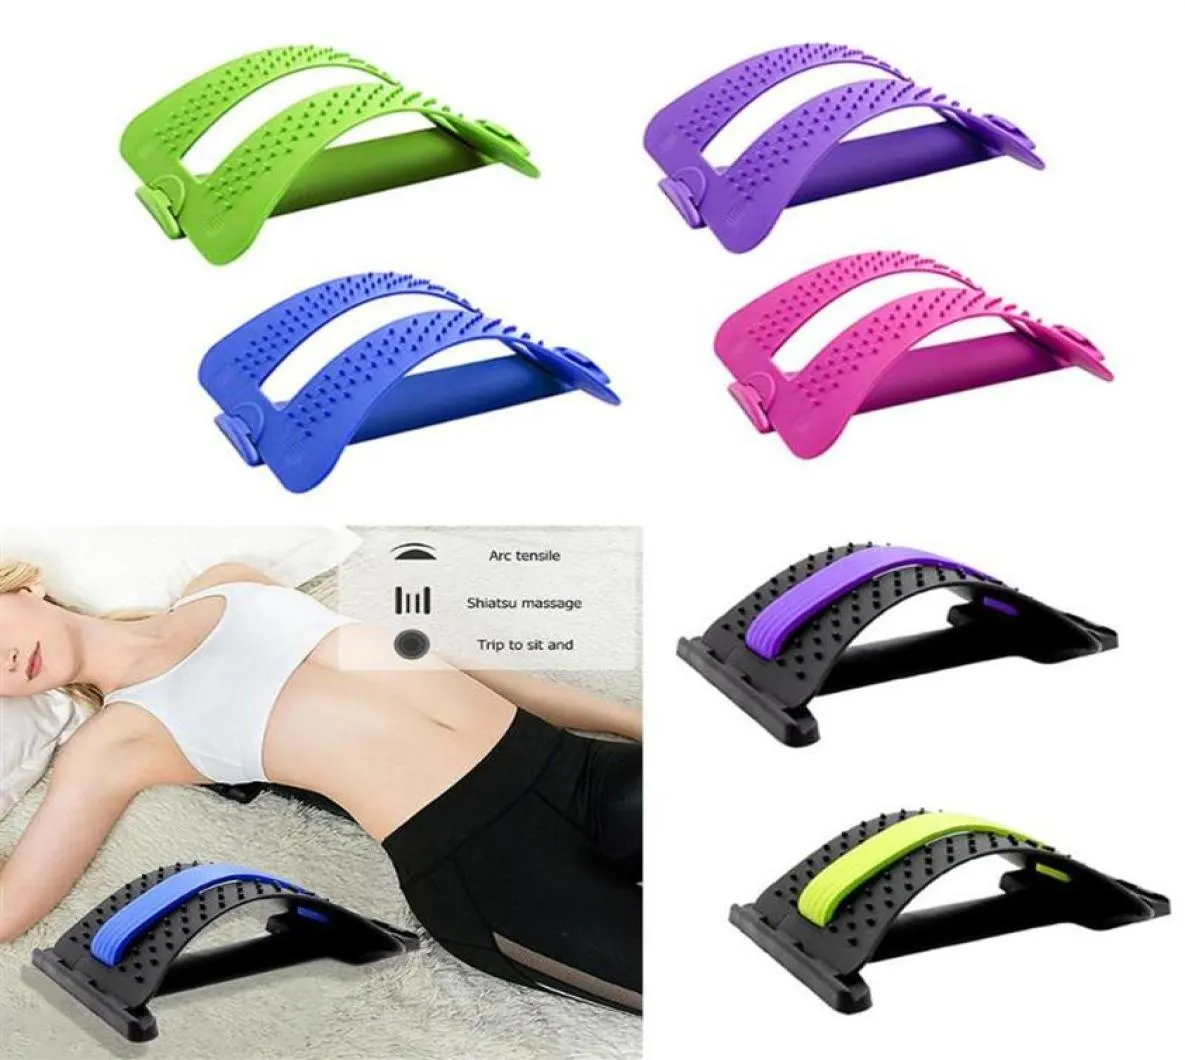 Back Stretch Equipment Masr Magic Stretcher Fitness Lumbar Support Relaxation Spine Corrector Health Care Masr Tool271P8323941